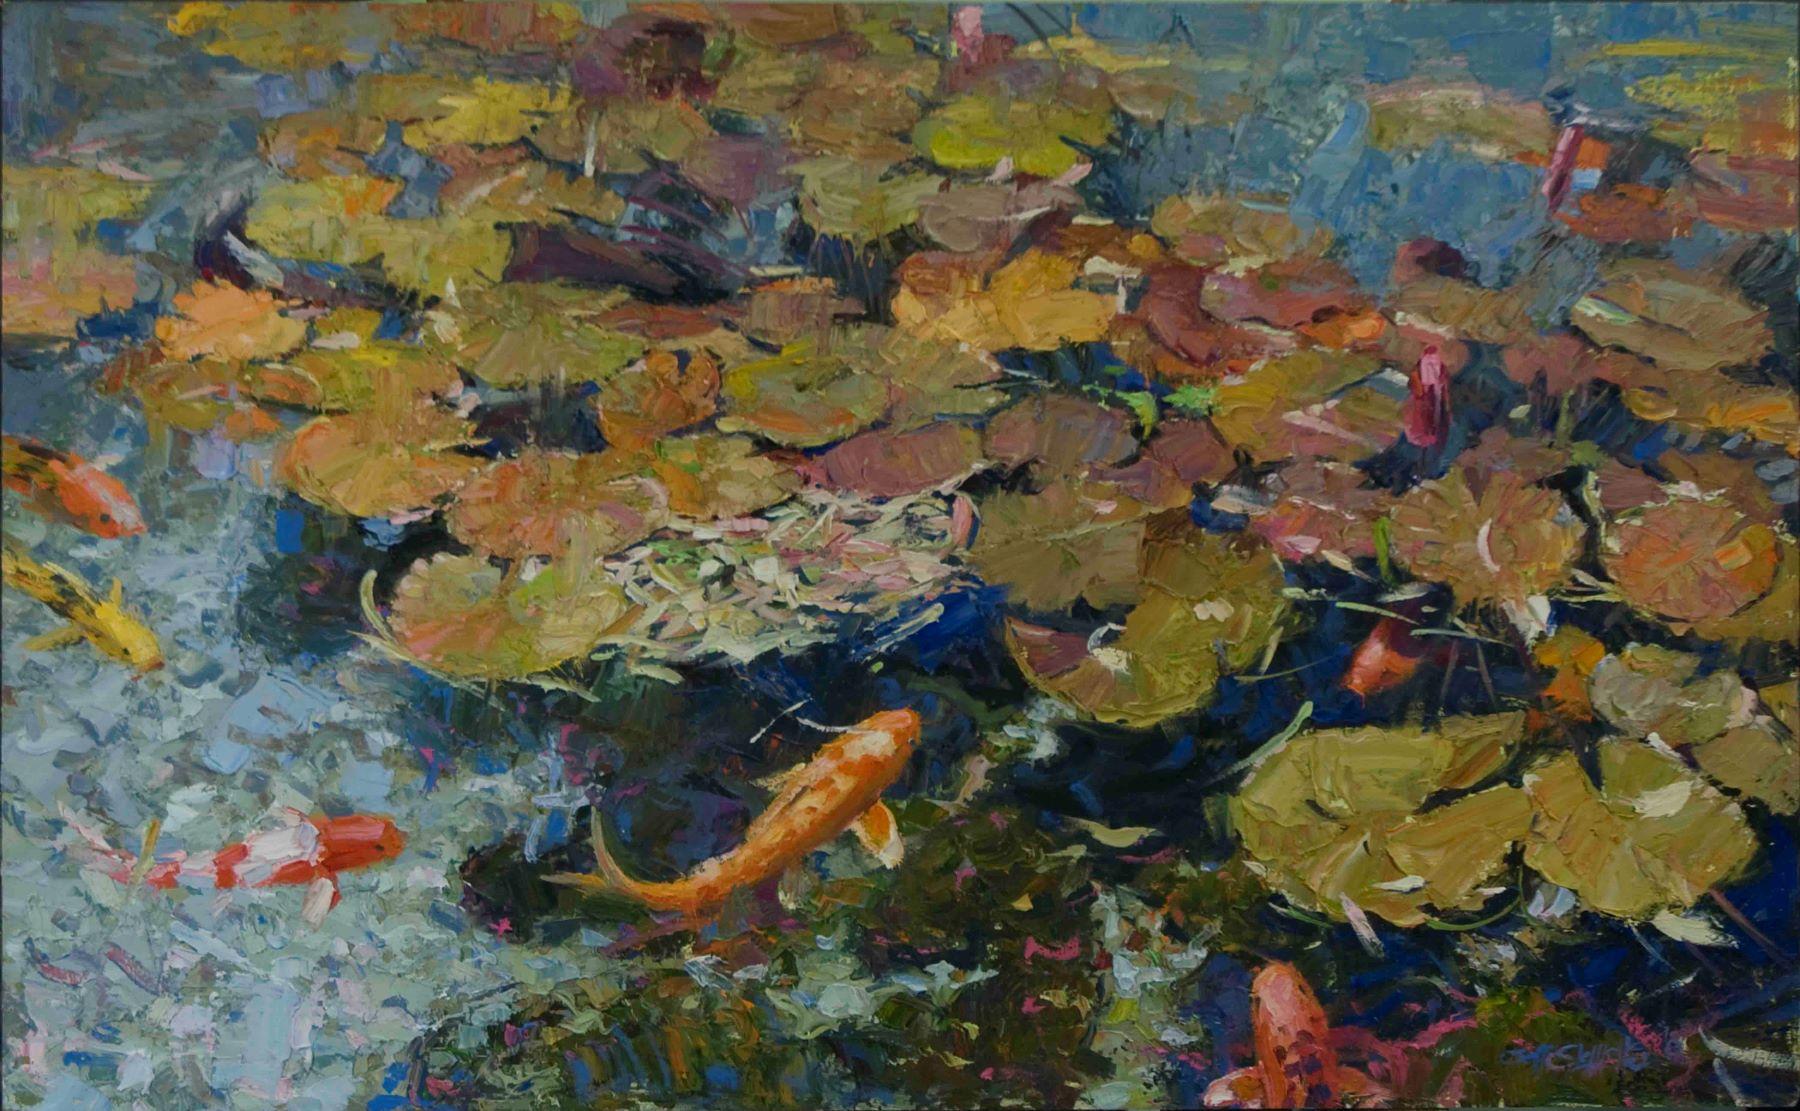 Jeff Slemons Animal Painting - Petals on the Water, Oil Painting , American Impressionism, Koi Fish, Outdoors